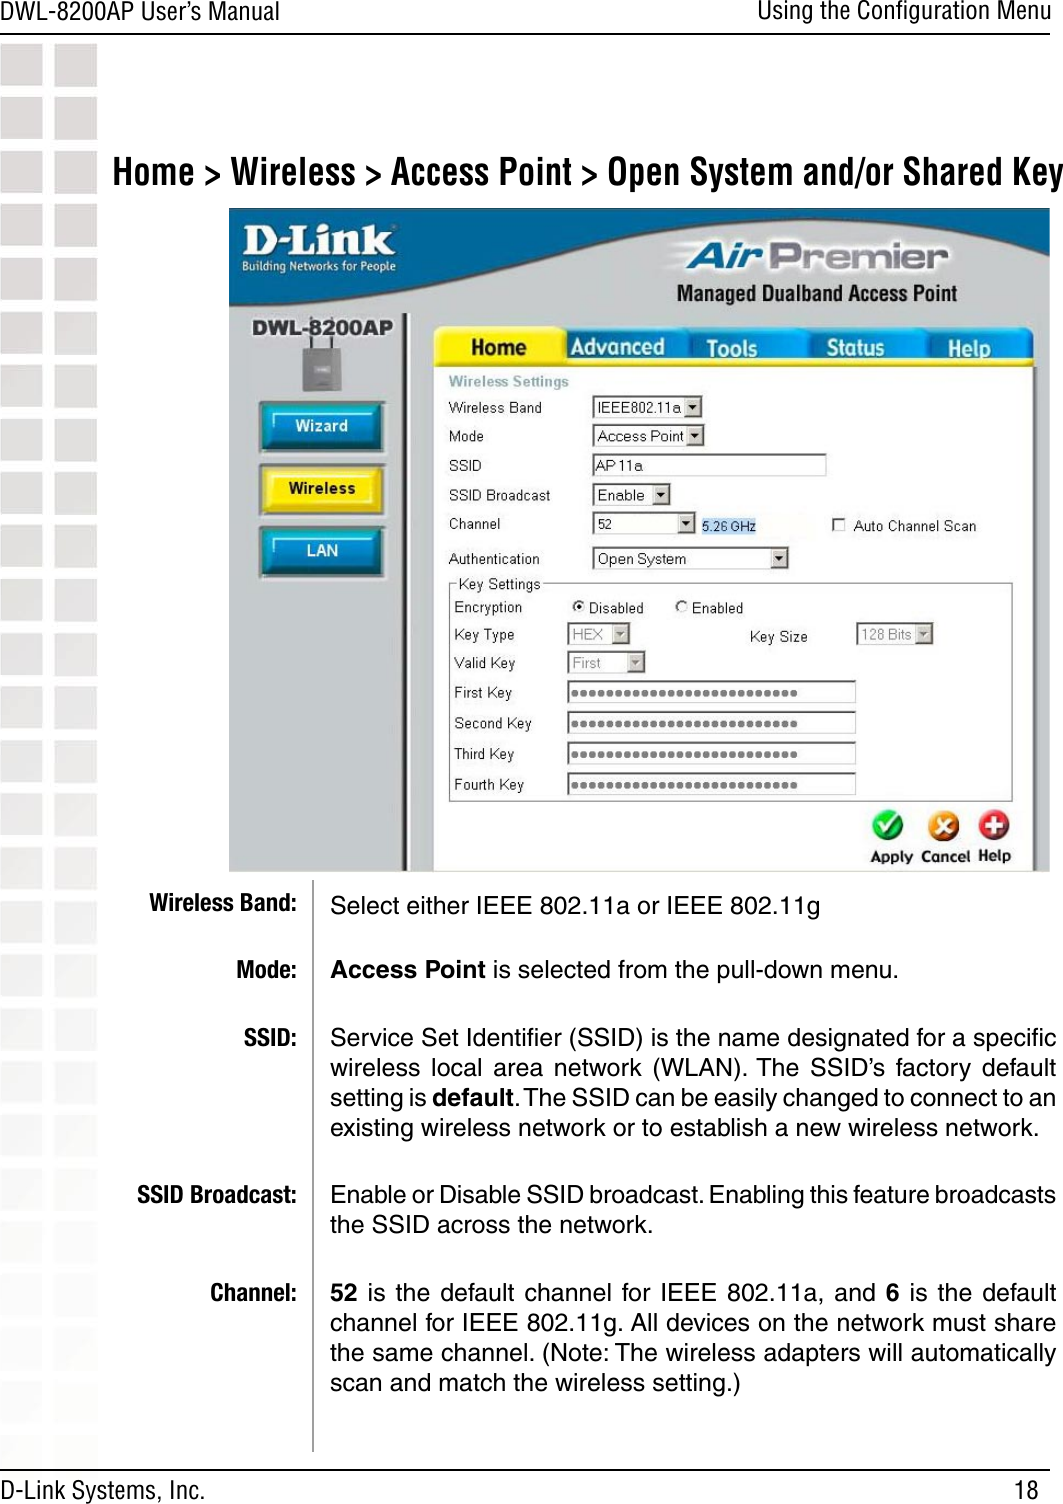 18DWL-8200AP User’s ManualD-Link Systems, Inc.Using the Conﬁguration MenuHome &gt; Wireless &gt; Access Point &gt; Open System and/or Shared KeySelect either IEEE 802.11a or IEEE 802.11g Access Point is selected from the pull-down menu.Service Set Identiﬁer (SSID) is the name designated for a speciﬁc wireless  local  area  network  (WLAN). The  SSID’s  factory  default setting is default. The SSID can be easily changed to connect to an existing wireless network or to establish a new wireless network.Enable or Disable SSID broadcast. Enabling this feature broadcasts the SSID across the network.52 is  the  default channel  for IEEE  802.11a,  and  6 is  the  default channel for IEEE 802.11g. All devices on the network must share the same channel. (Note: The wireless adapters will automatically scan and match the wireless setting.) Wireless Band:Mode:SSID:SSID Broadcast:Channel: